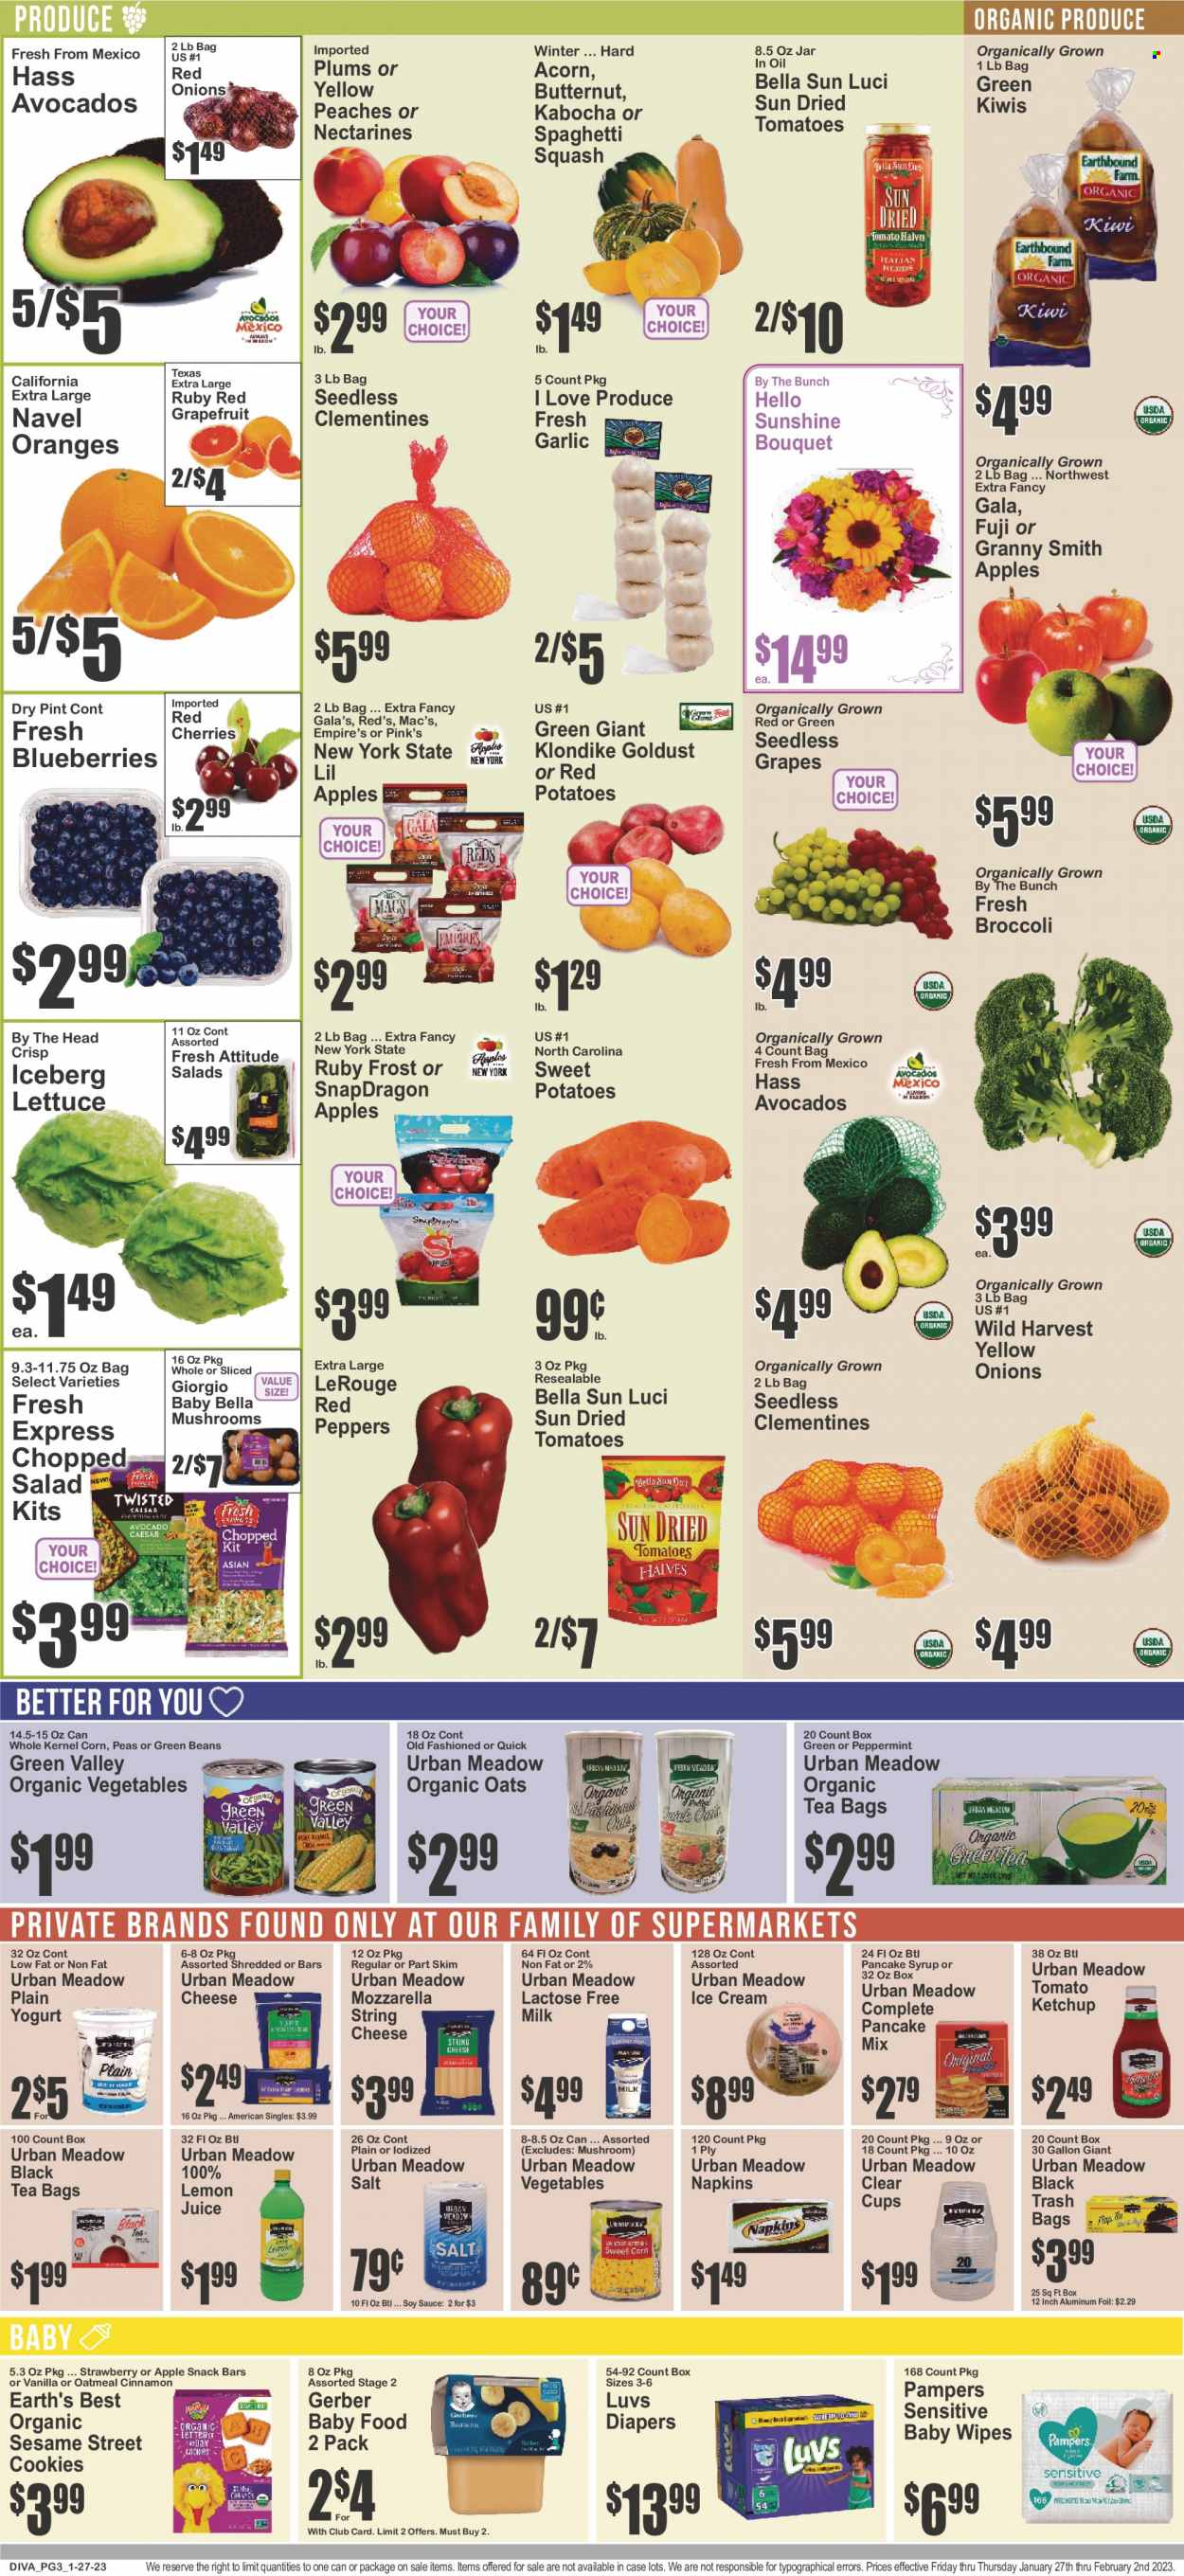 thumbnail - Brooklyn Fare Flyer - 01/27/2023 - 02/02/2023 - Sales products - mushrooms, beans, broccoli, corn, garlic, green beans, red onions, potatoes, pumpkin, peas, onion, lettuce, salad, peppers, Wild Harvest, red potatoes, chopped salad, red peppers, avocado, blueberries, Gala, grapefruits, grapes, kiwi, seedless grapes, plums, oranges, Granny Smith, sauce, mozzarella, string cheese, cheese, yoghurt, milk, lactose free milk, ice cream, cookies, snack, snack bar, Sesame Street, Gerber, oatmeal, oats, dried tomatoes, Bella Sun Luci, cinnamon, soy sauce, ketchup, pancake syrup, syrup, lemon juice, tea bags, Mac’s, wipes, Pampers, baby wipes, napkins, nappies, trash bags, cup, aluminium foil, bouquet, butternut squash, clementines, nectarines, peaches, navel oranges. Page 3.